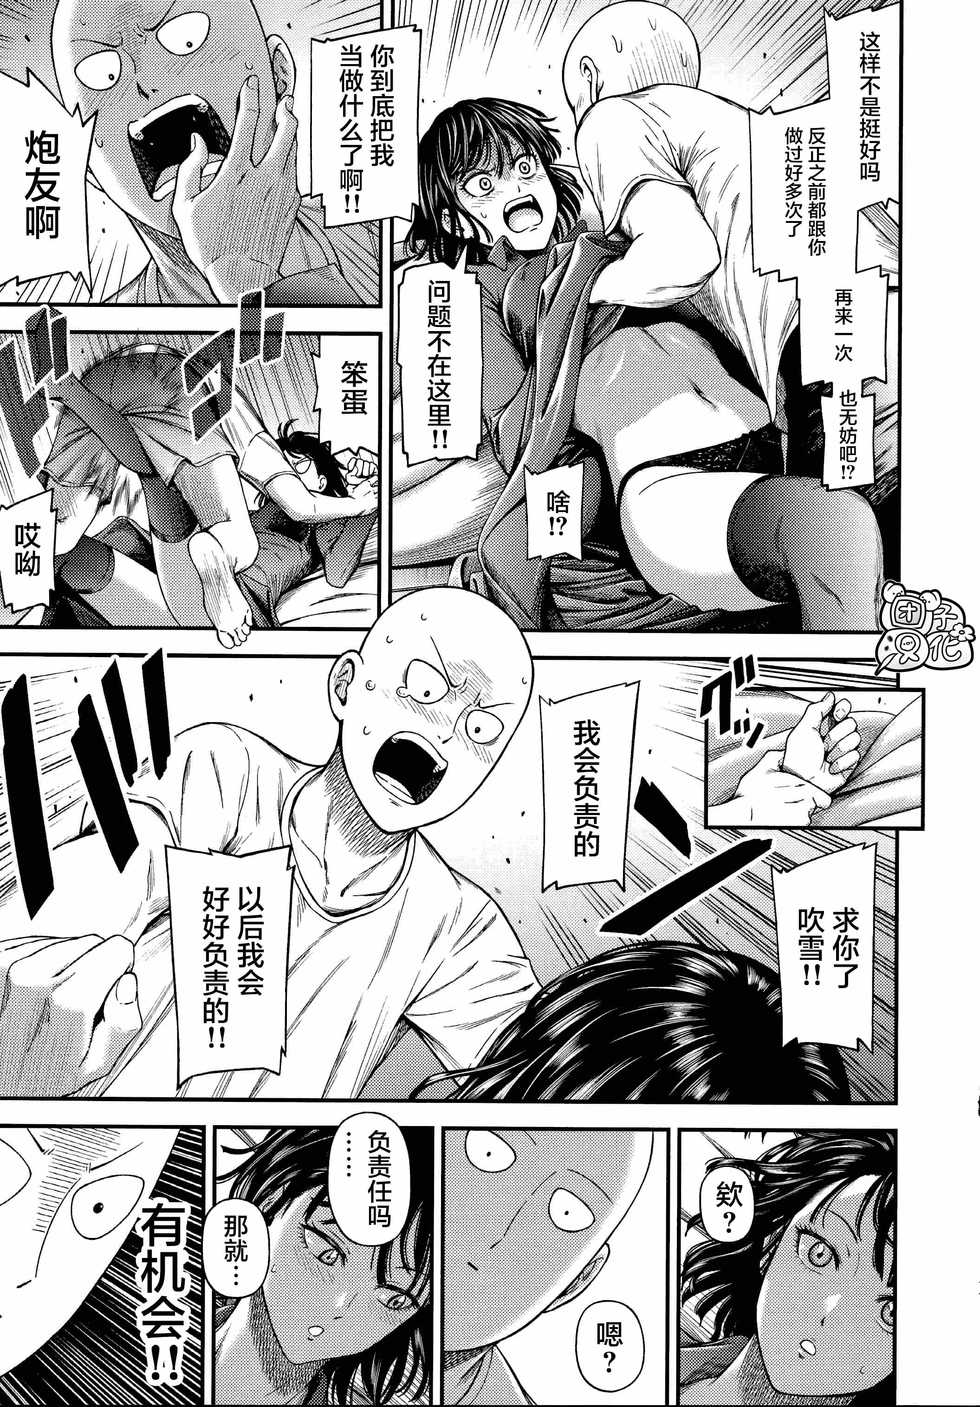 [Kiyosumi Hurricane (Kiyosumi Hurricane)] ONE-HURRICANE 6.5 (One Punch Man) [Chinese] [团子汉化组] - Page 12